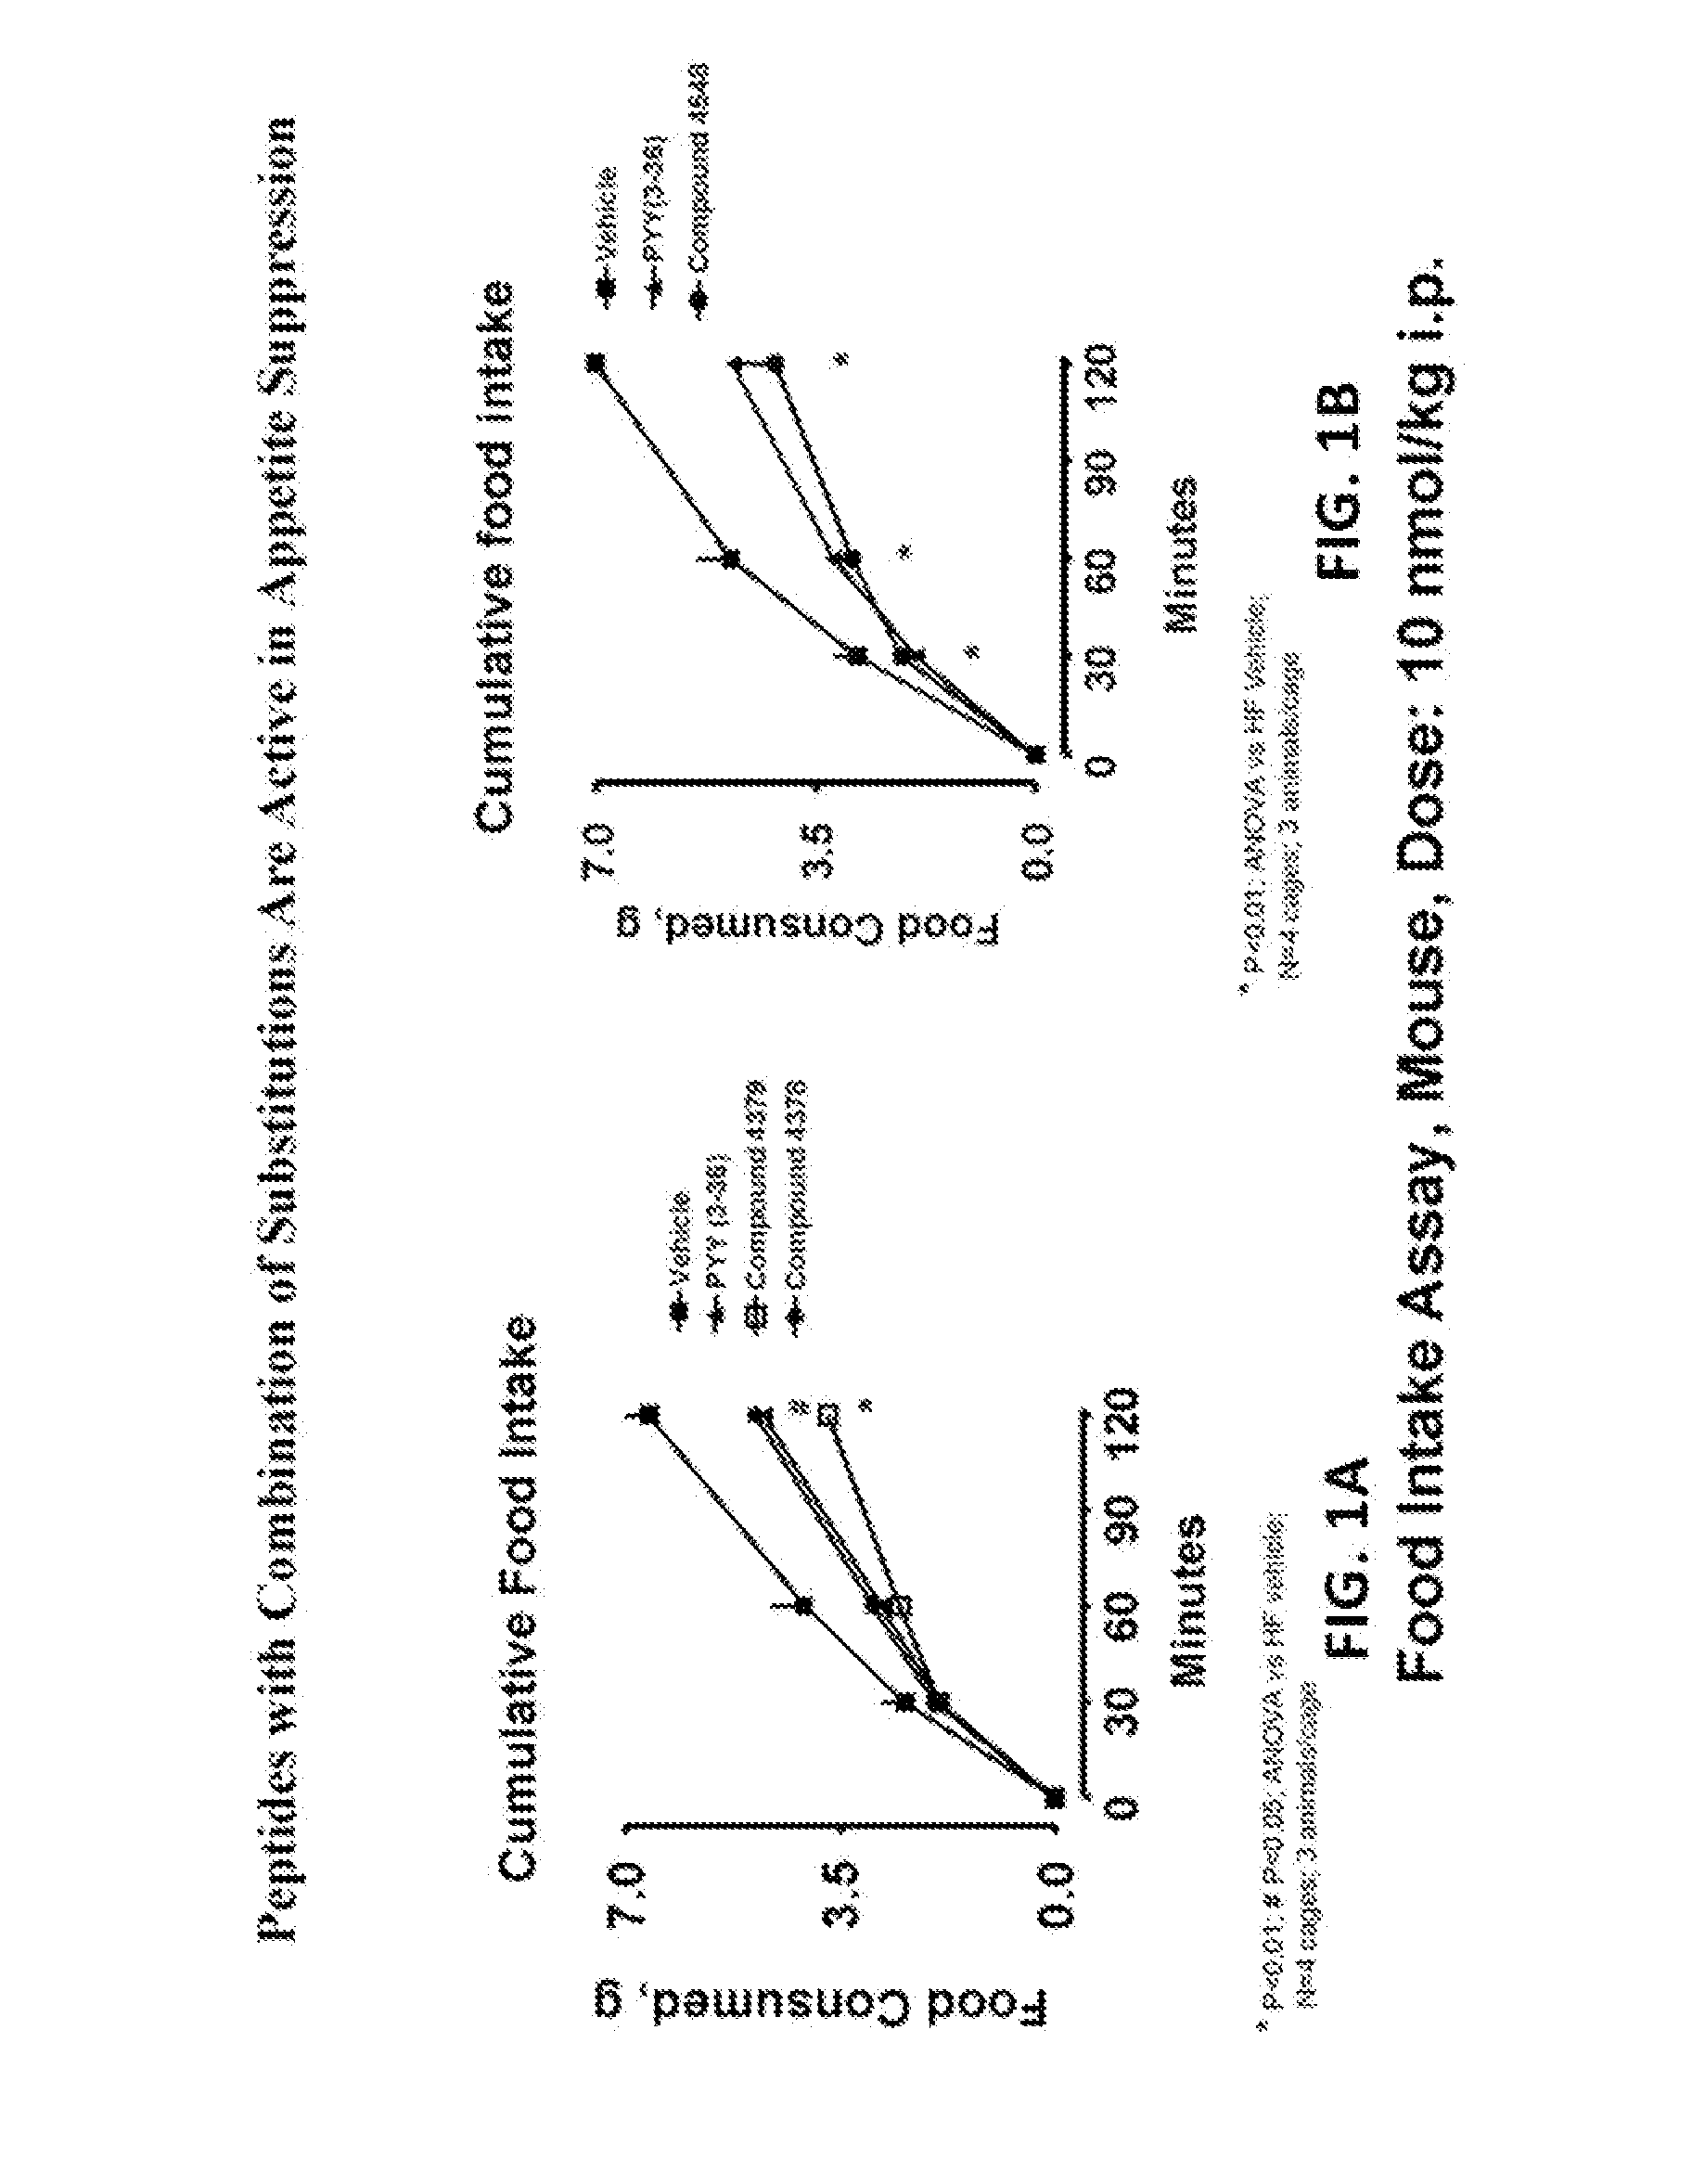 Pancreatic polypeptide family motifs, polypeptides and methods comprising the same